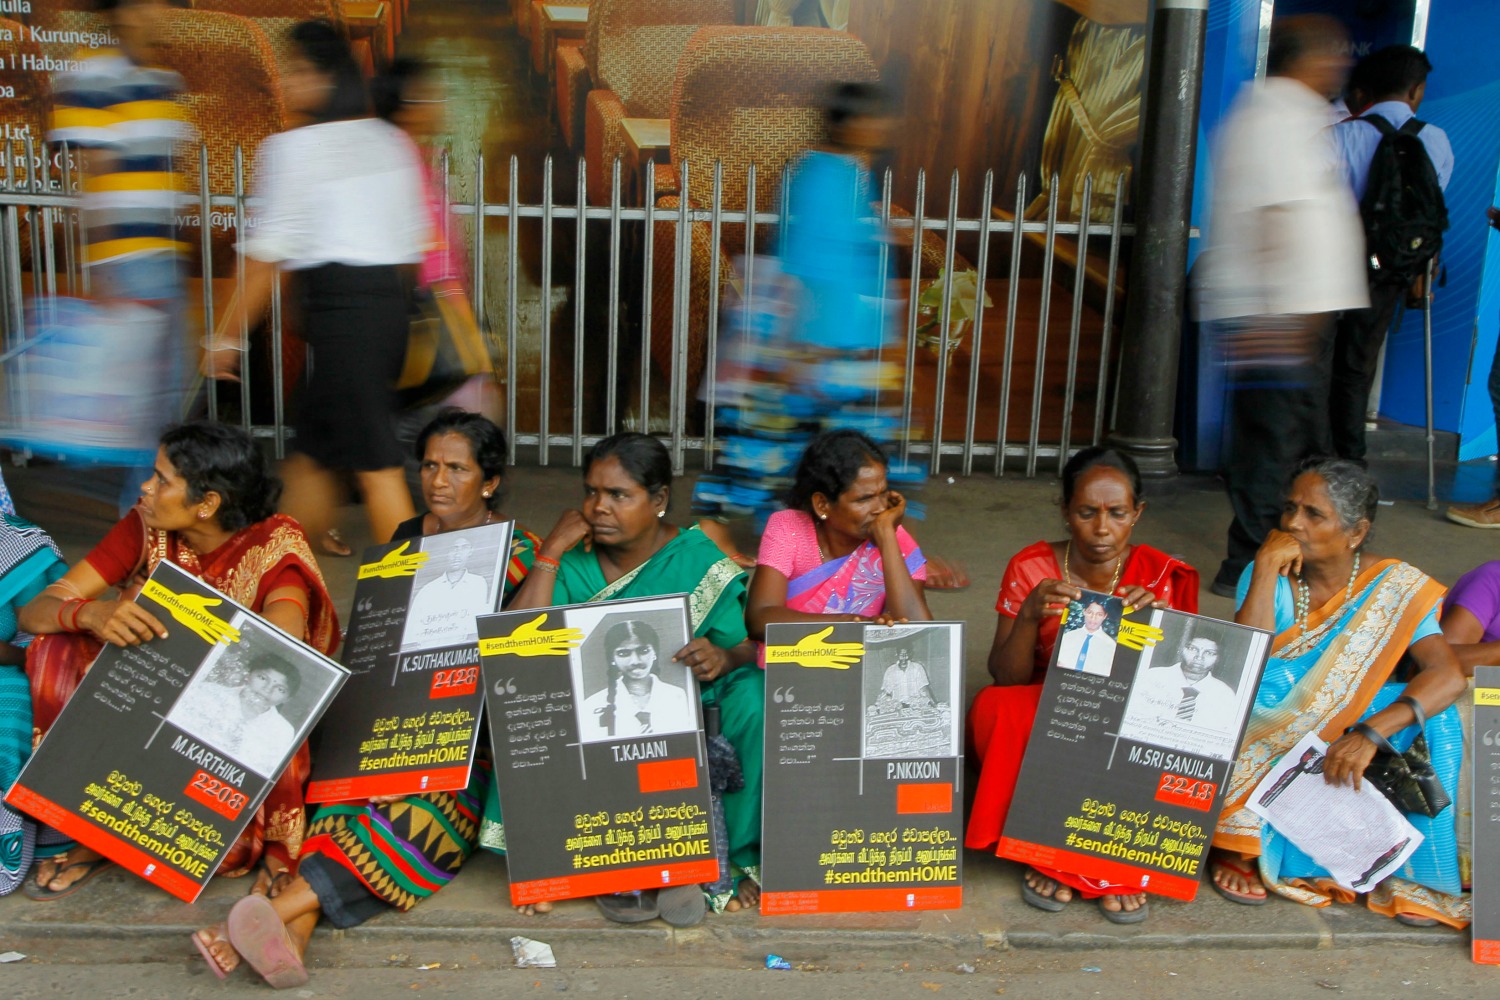 ** HOLD TO GO WITH STORY SLUGGED SRI LANKA SLOWLY HEALING BY KRISHAN FRANCIS**   FILE-In this Monday, April 6, 2015, file photo, Sri Lankan ethnic Tamil women sit holding placards with portraits of their missing relatives as they protest out side a railway station in Colombo, Sri Lanka. Seven years since the end of a brutal civil war, Sri Lanka faces the daunting twin challenges of uniting ethnic communities polarized due to decades of acrimony and violence while also dealing with the divisive issue of addressing war crimes allegations. (AP Photo/Eranga Jayawardena, File)